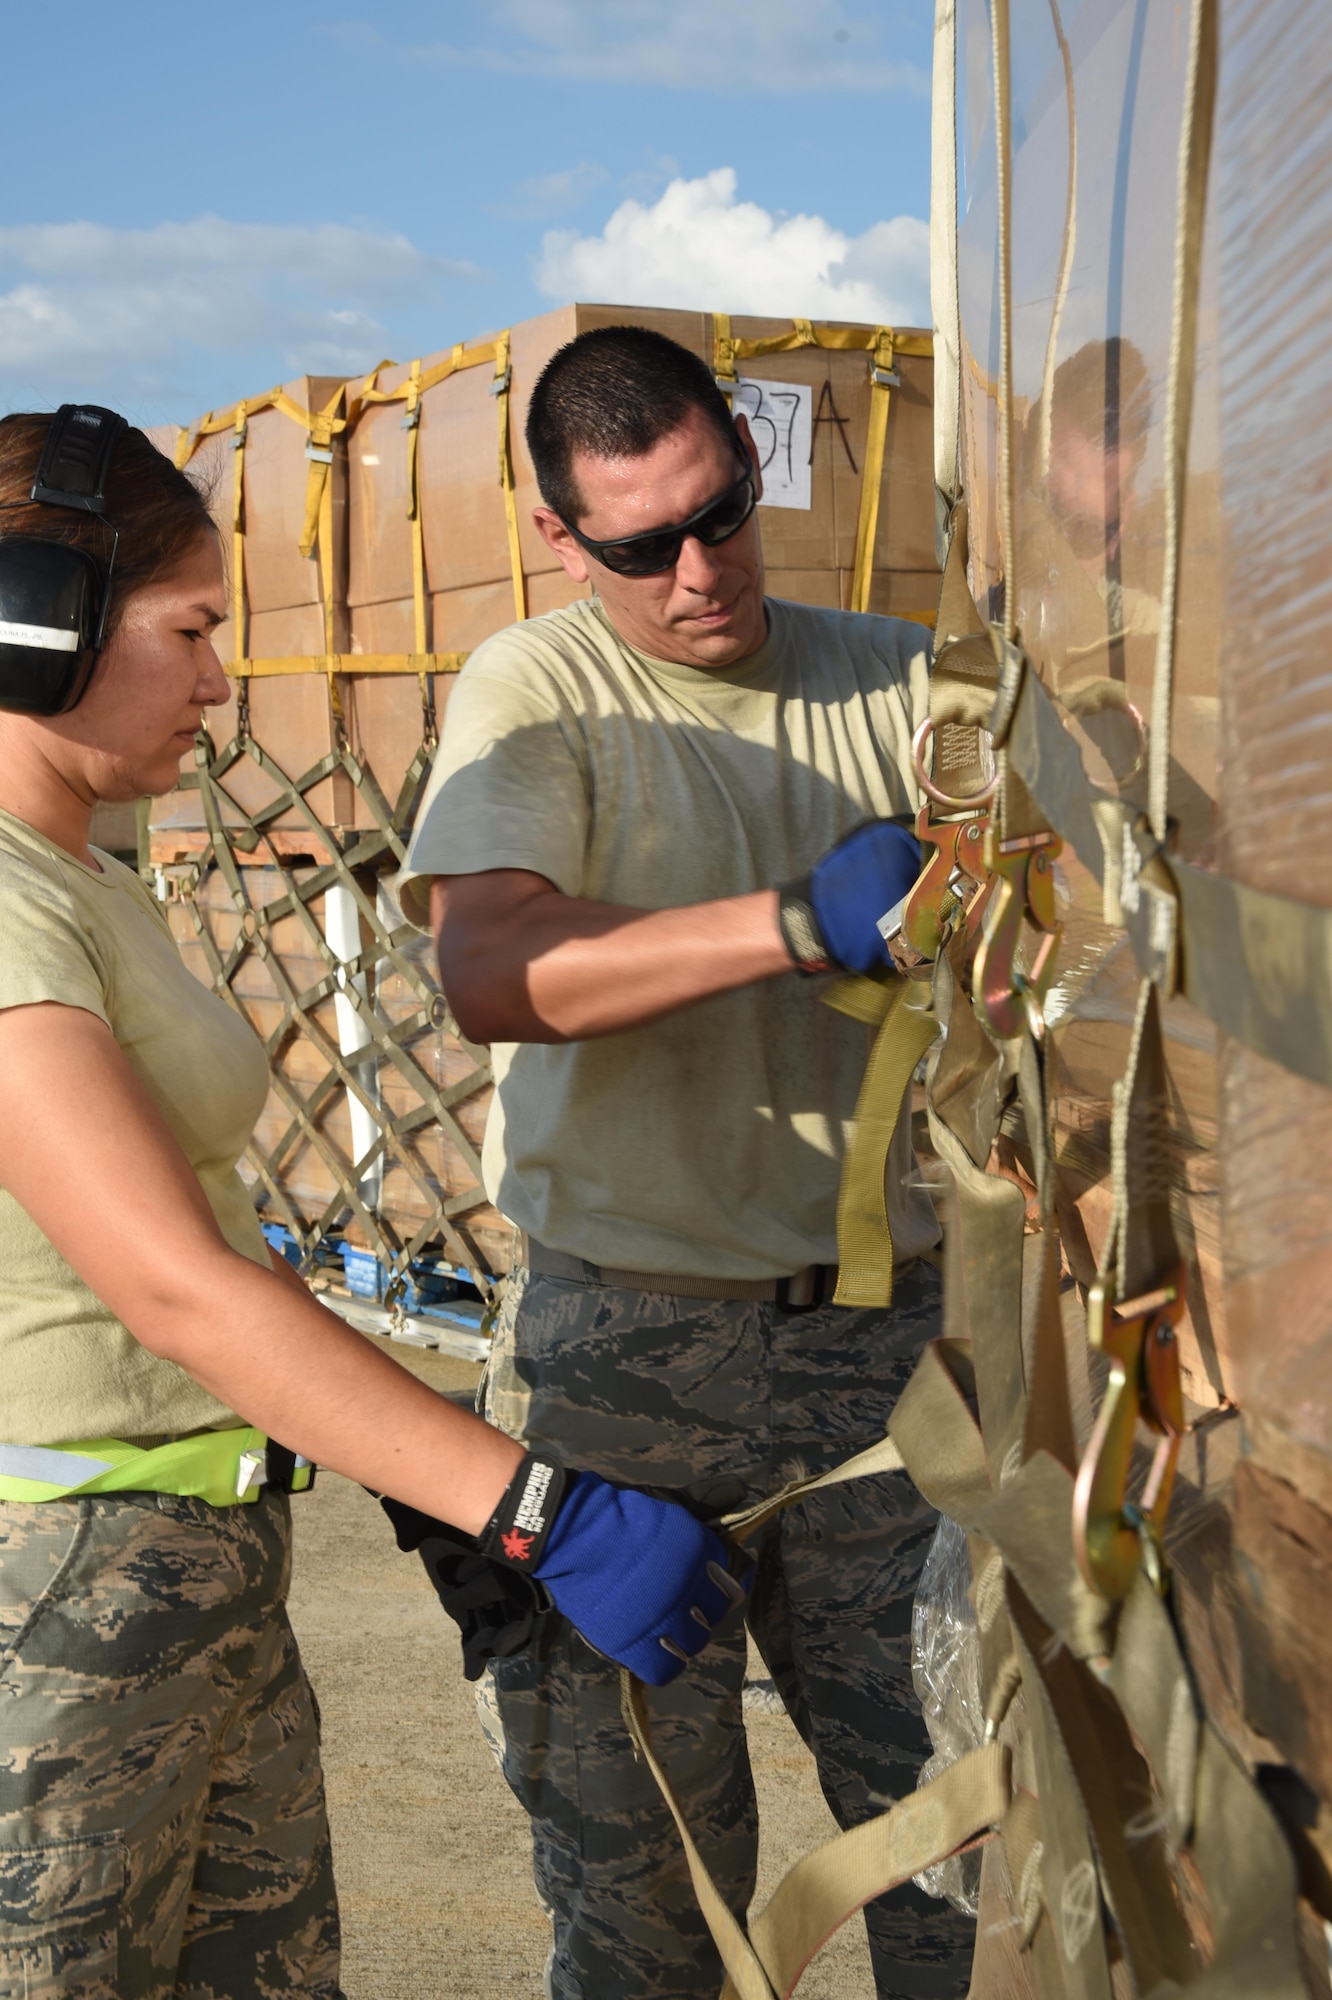 (left to right) Air Force Master Sgt. Viviana Molina, 73rd Aerial Port Squadron air transportation, and Tech. Sgt. Lucas Ortego, 73 APS cargo supervisor, secure webbing straps on 90,000 lbs. of American Red Cross supplies August 29, 2017, at Naval Air Station Fort Worth Joint Reserve Base, Texas, in support of Hurricane Harvey relief efforts. Supplies included blankets and cots and were transported as part of the Defense Support of Civil Authority. Department of Defense provides medium and heavy lift rotary wing assets, along with ground transportation, to move personnel, commodities and equipment within Texas. (U.S. Air Force photo by Ms. Julie Briden-Garcia)